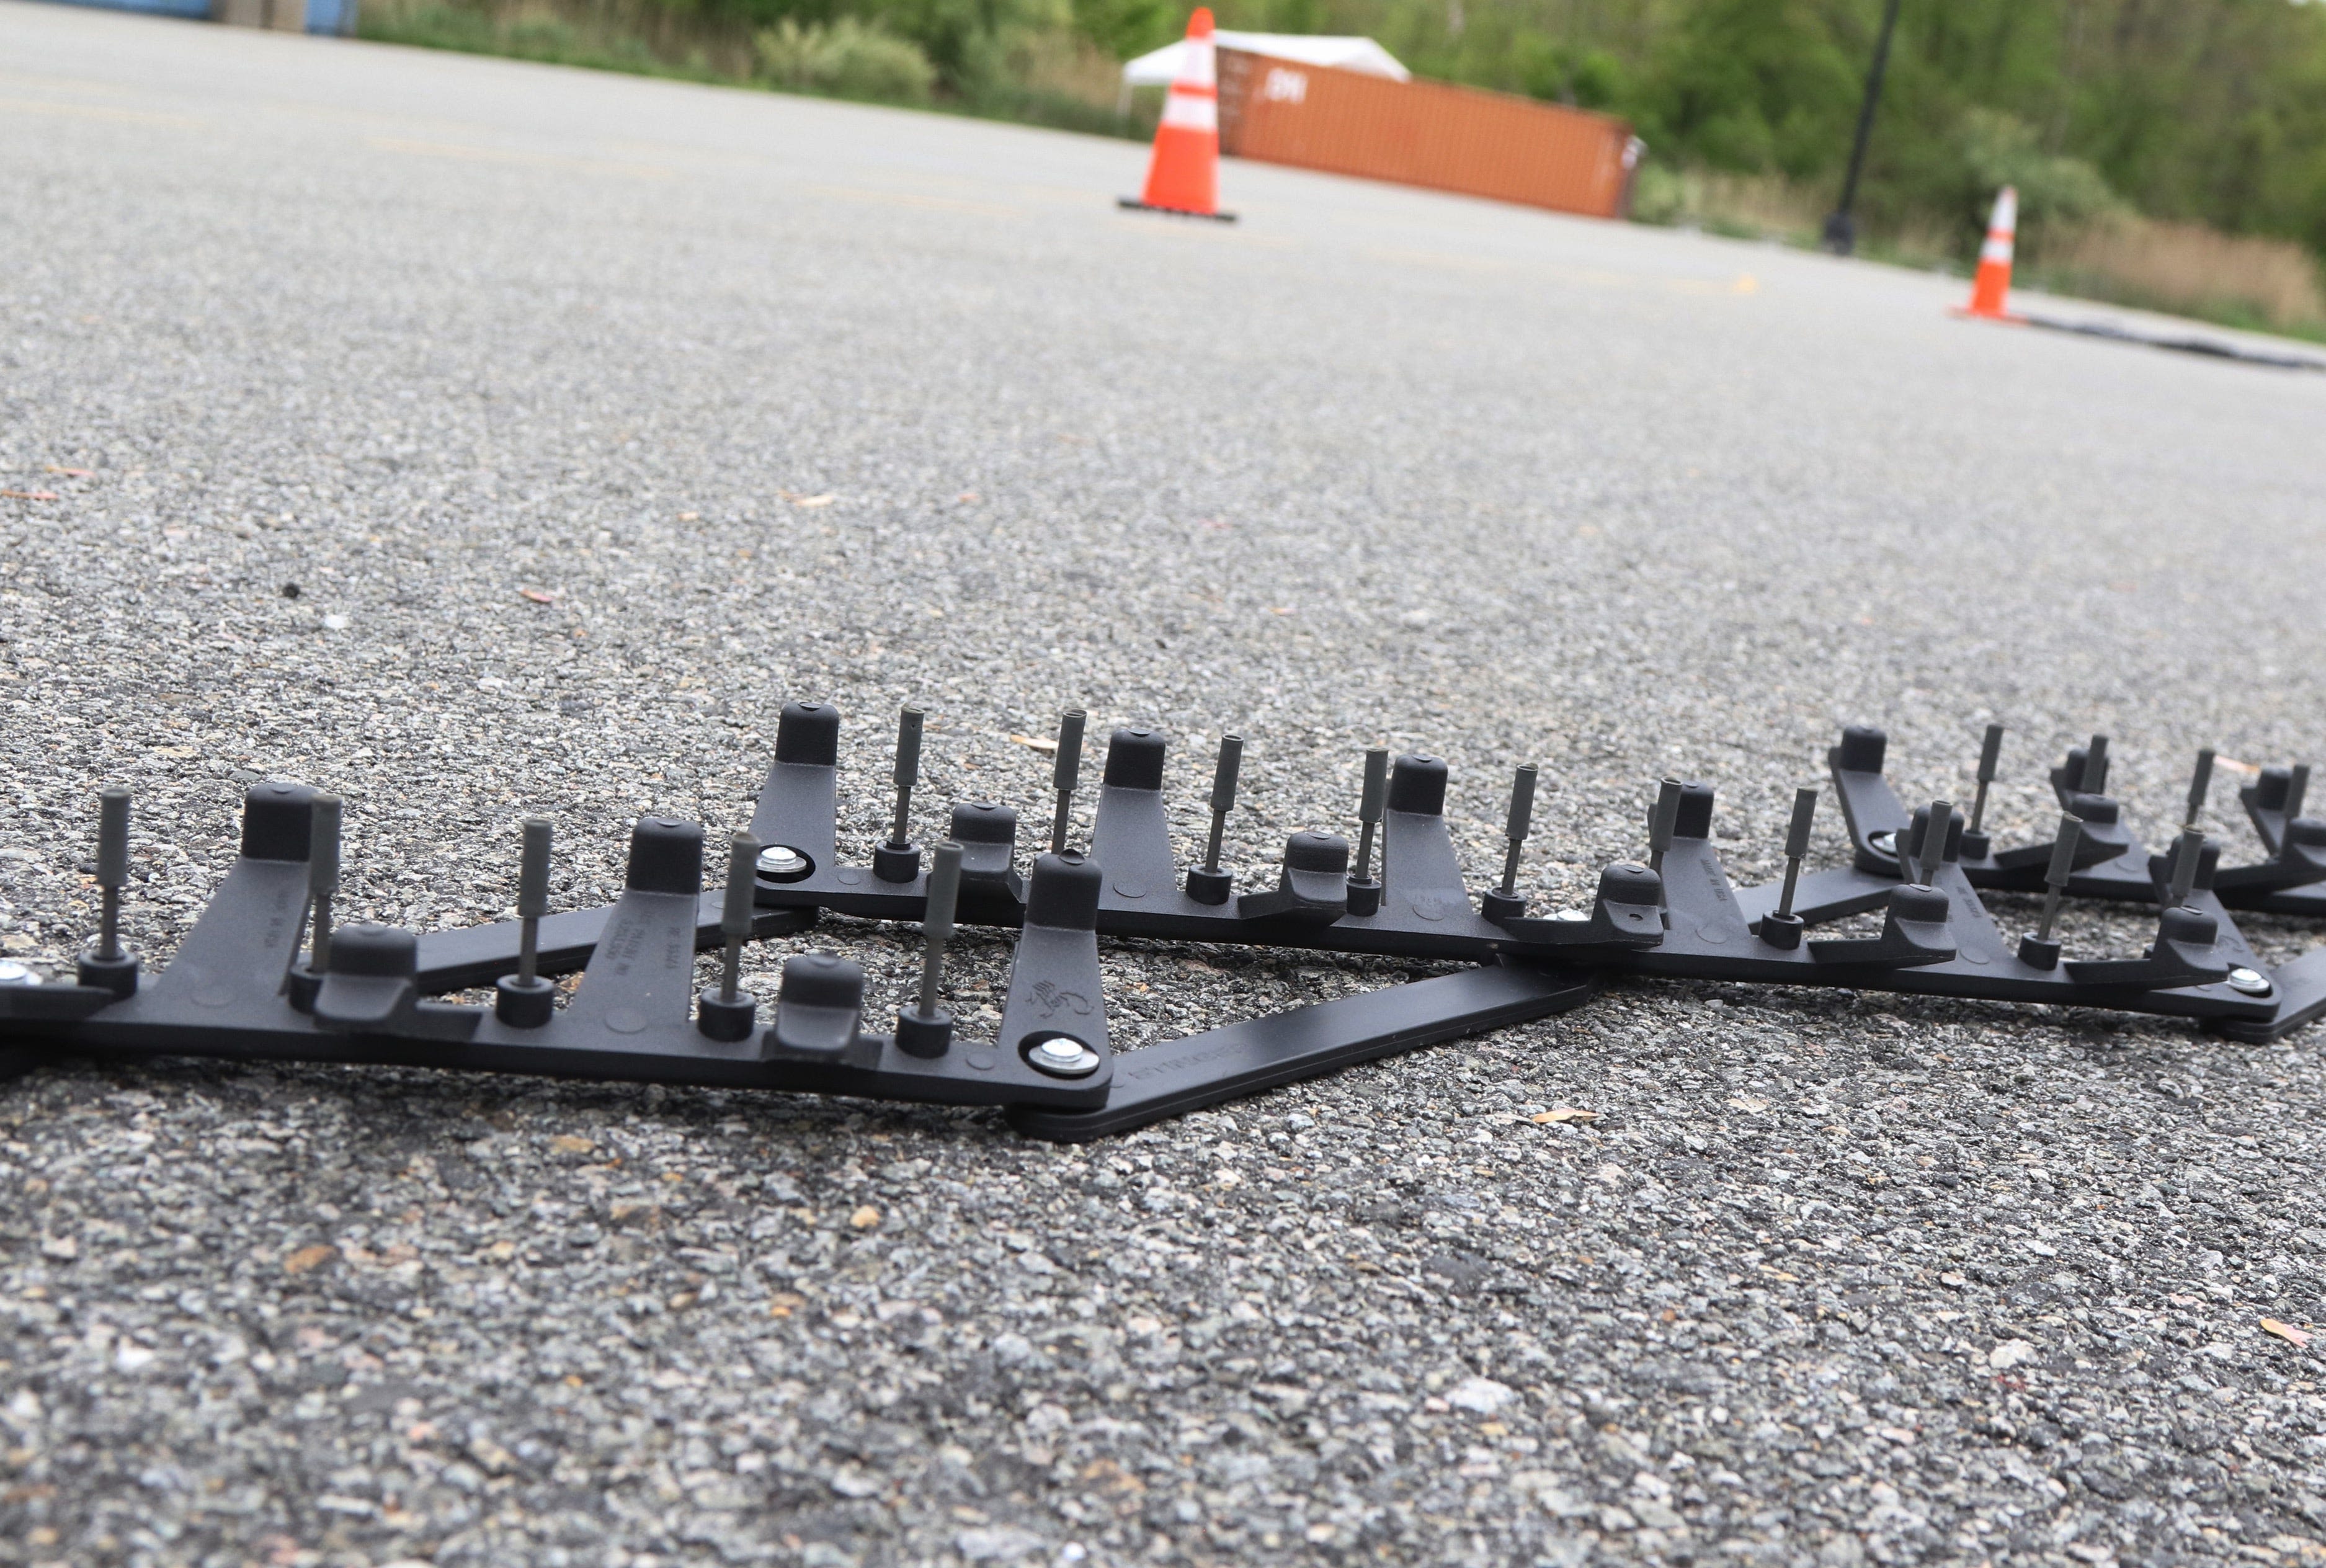 'Stop criminals in motion:' Morris officials demonstrate tire spike strips for pursuits